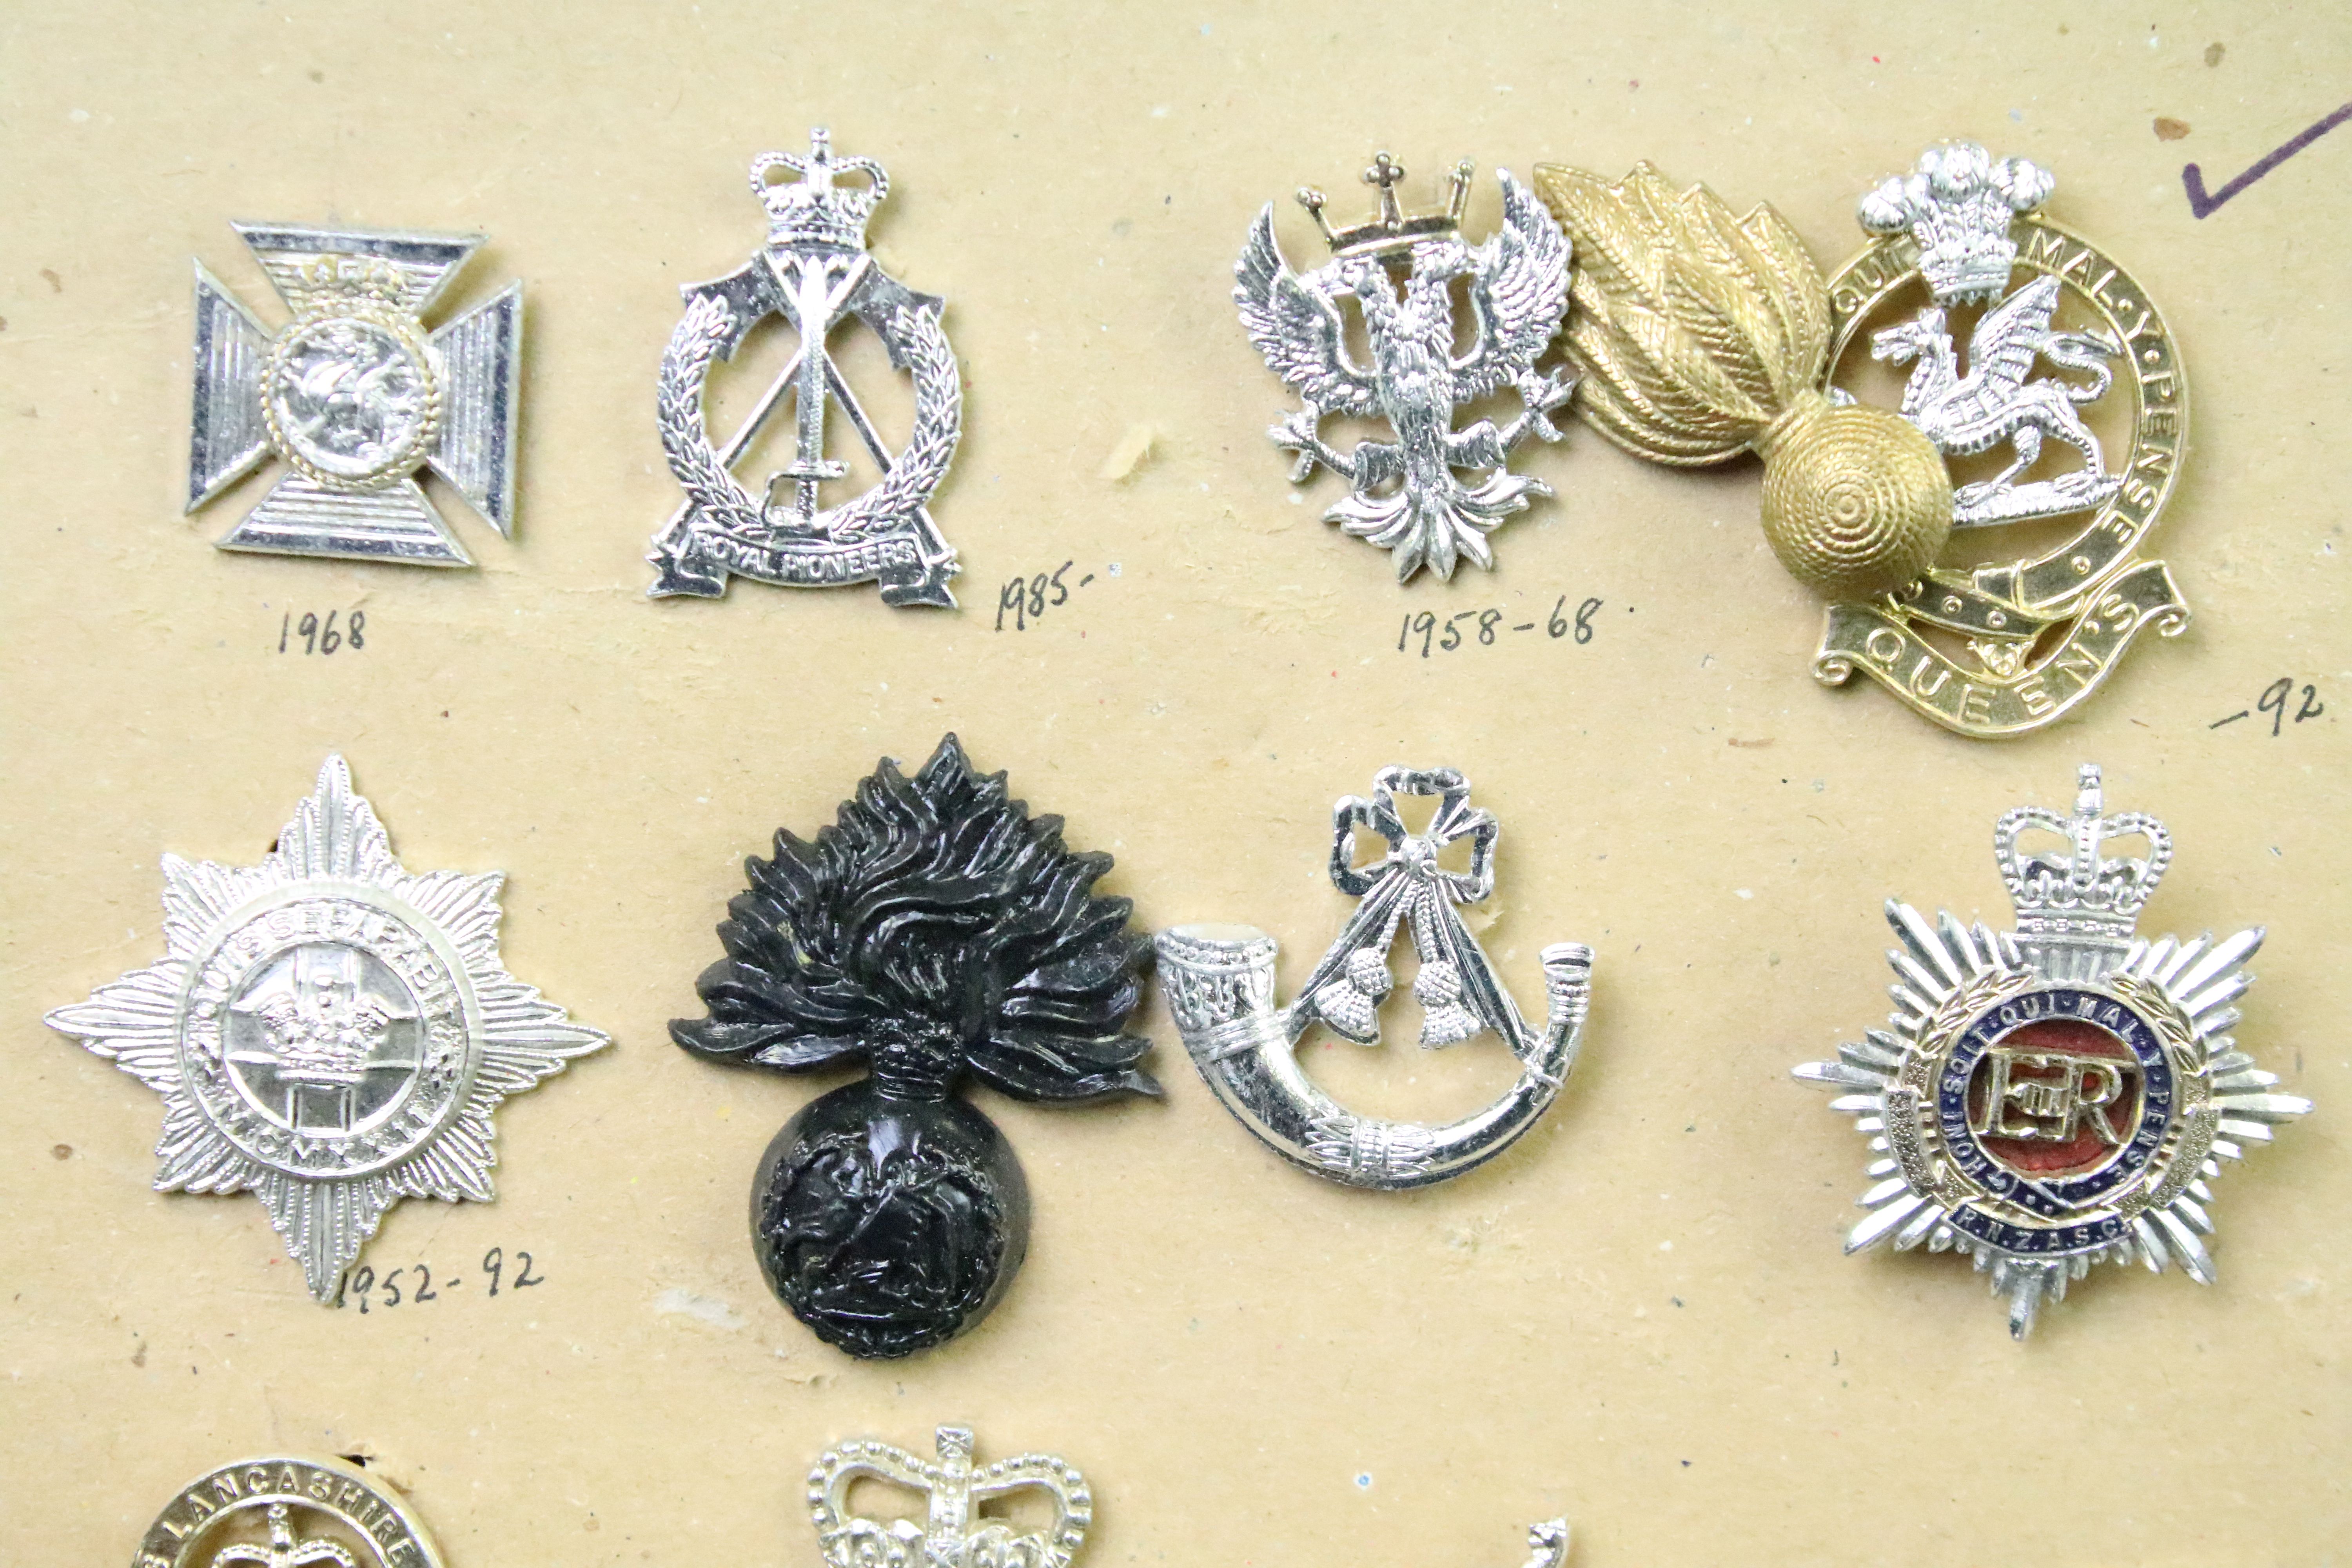 A collection of British military Regimental cap and collar badges to include the Yorkshire Regiment, - Image 11 of 13